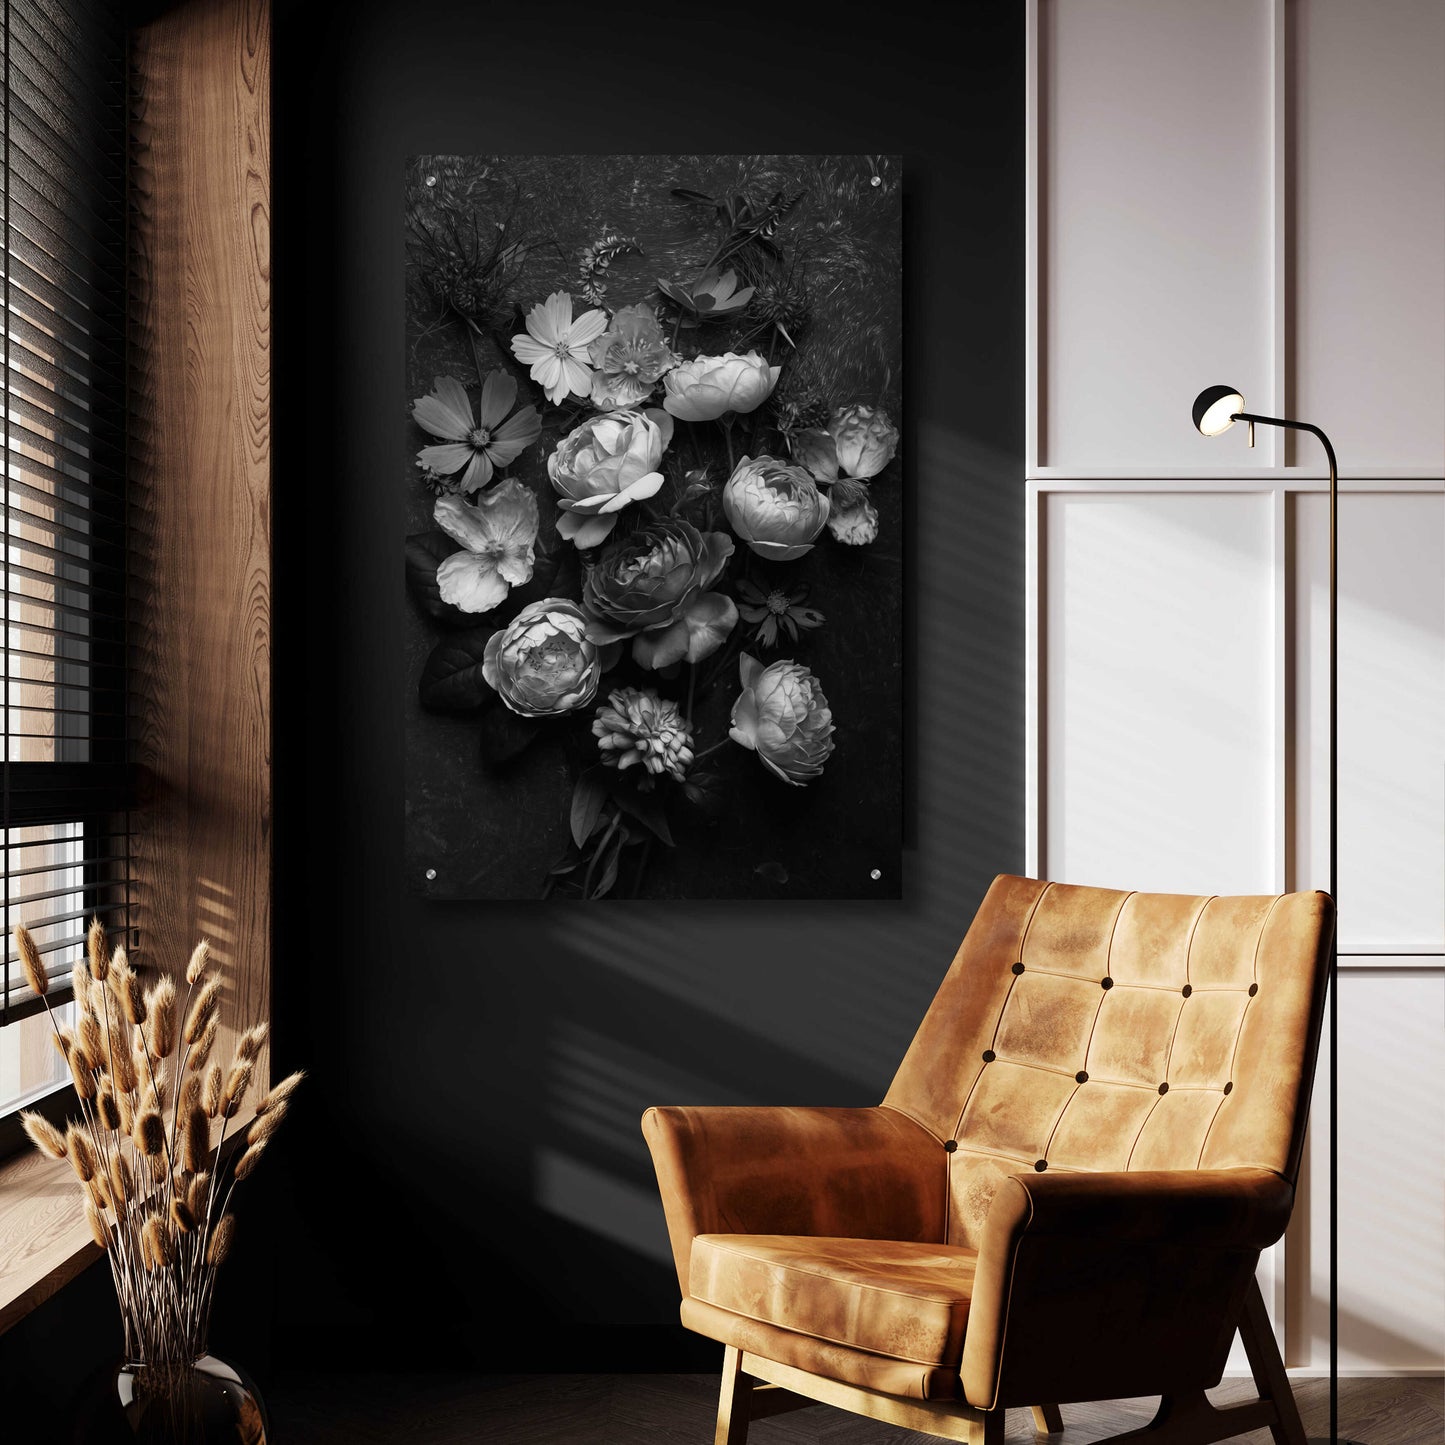 Epic Art 'A Monochrome Pocket Full of Posies' by Leah McLean, Acrylic Glass Wall Art,24x36